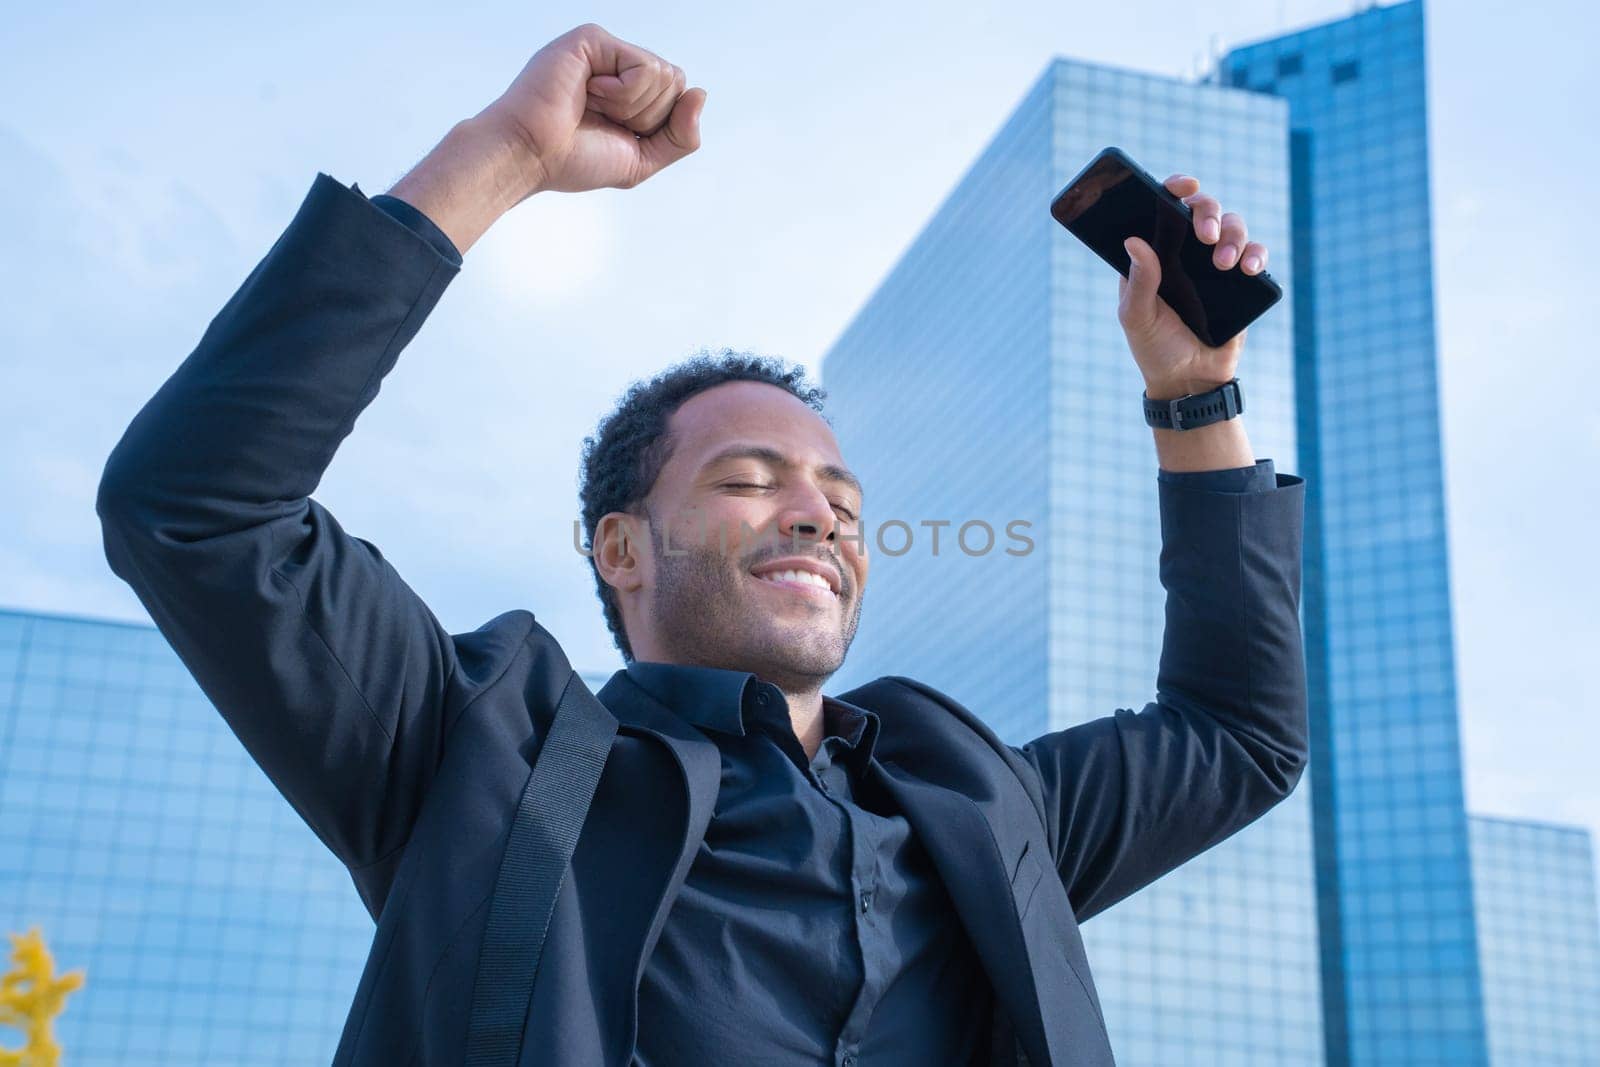 Happy businessman in suit with raised arms smiling celebrating success in the city. by PaulCarr